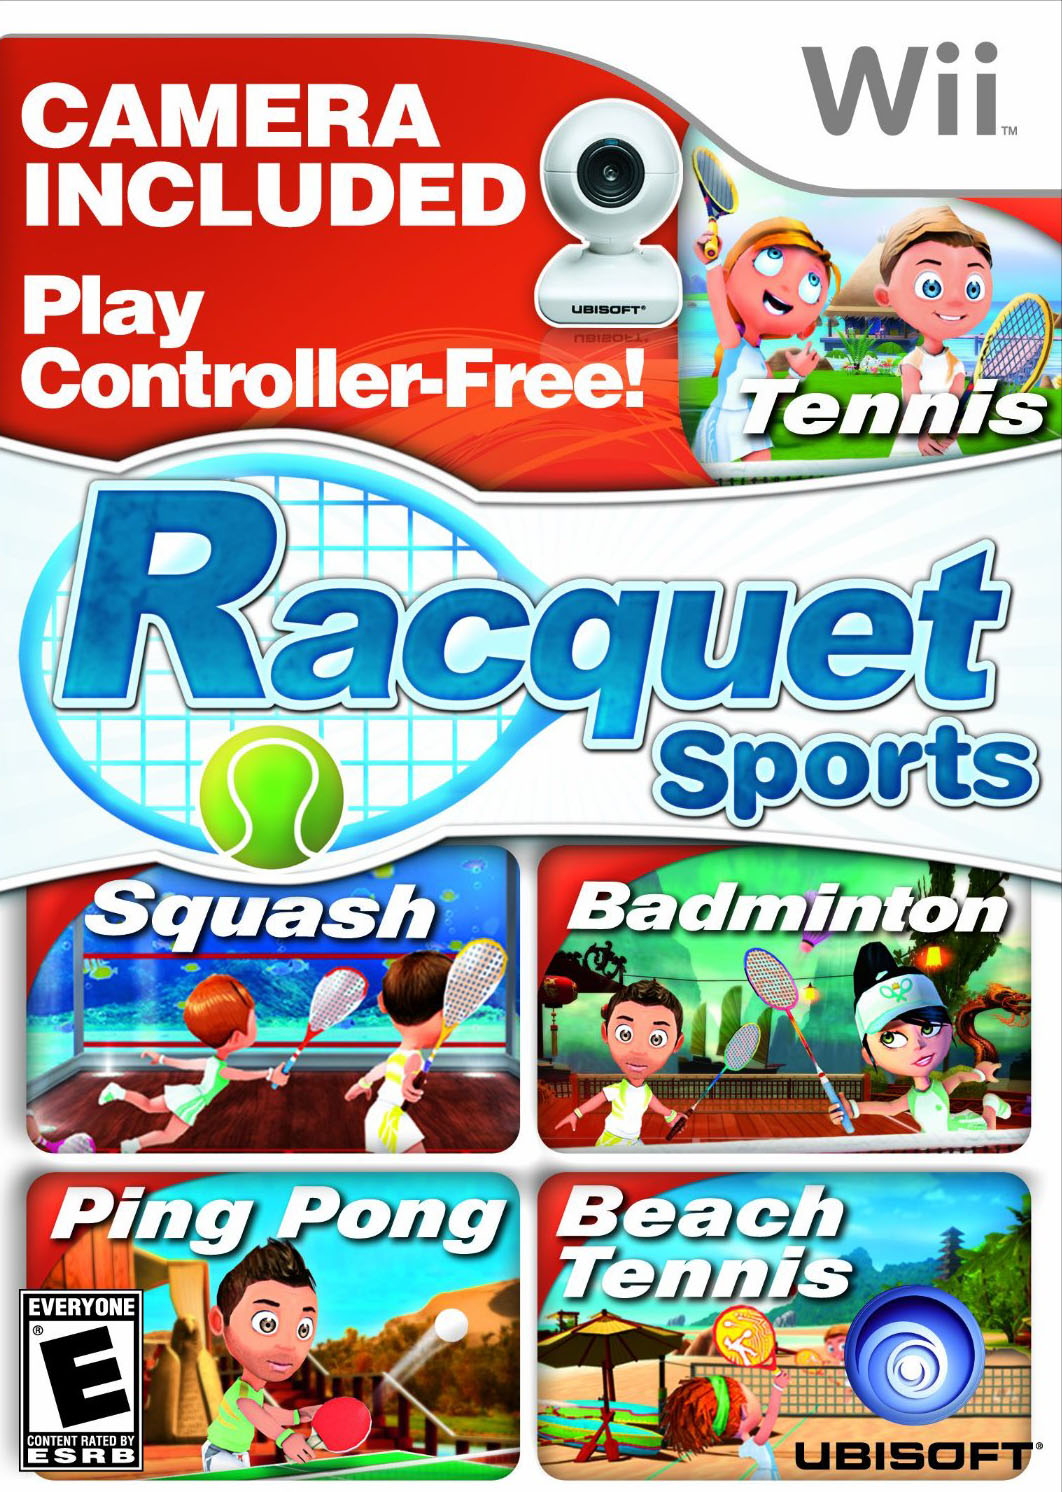 Racquet Sports W Camera - image 1 of 1